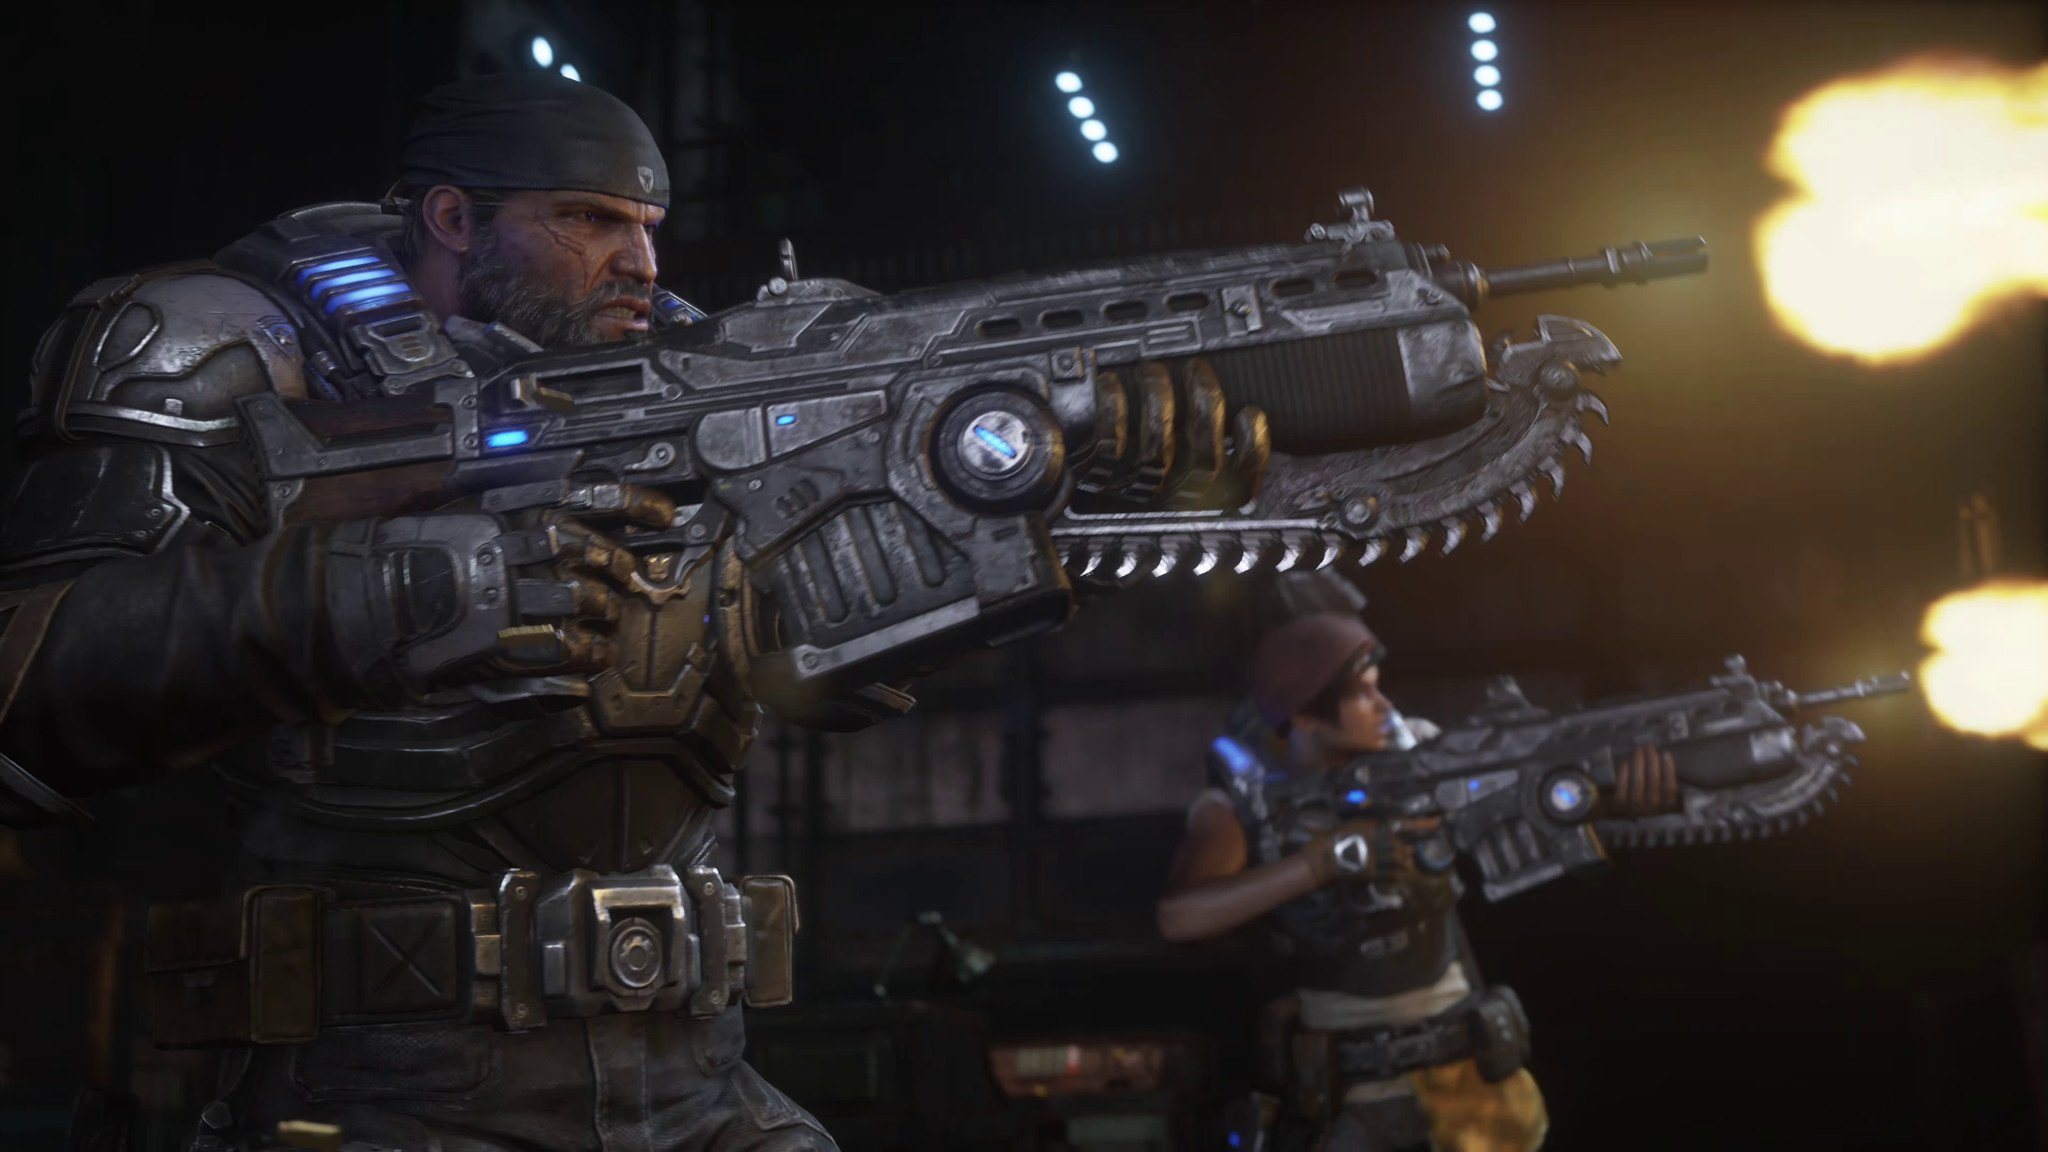 First Impressions: Gears 5 Looks Fantastic but Feels Off